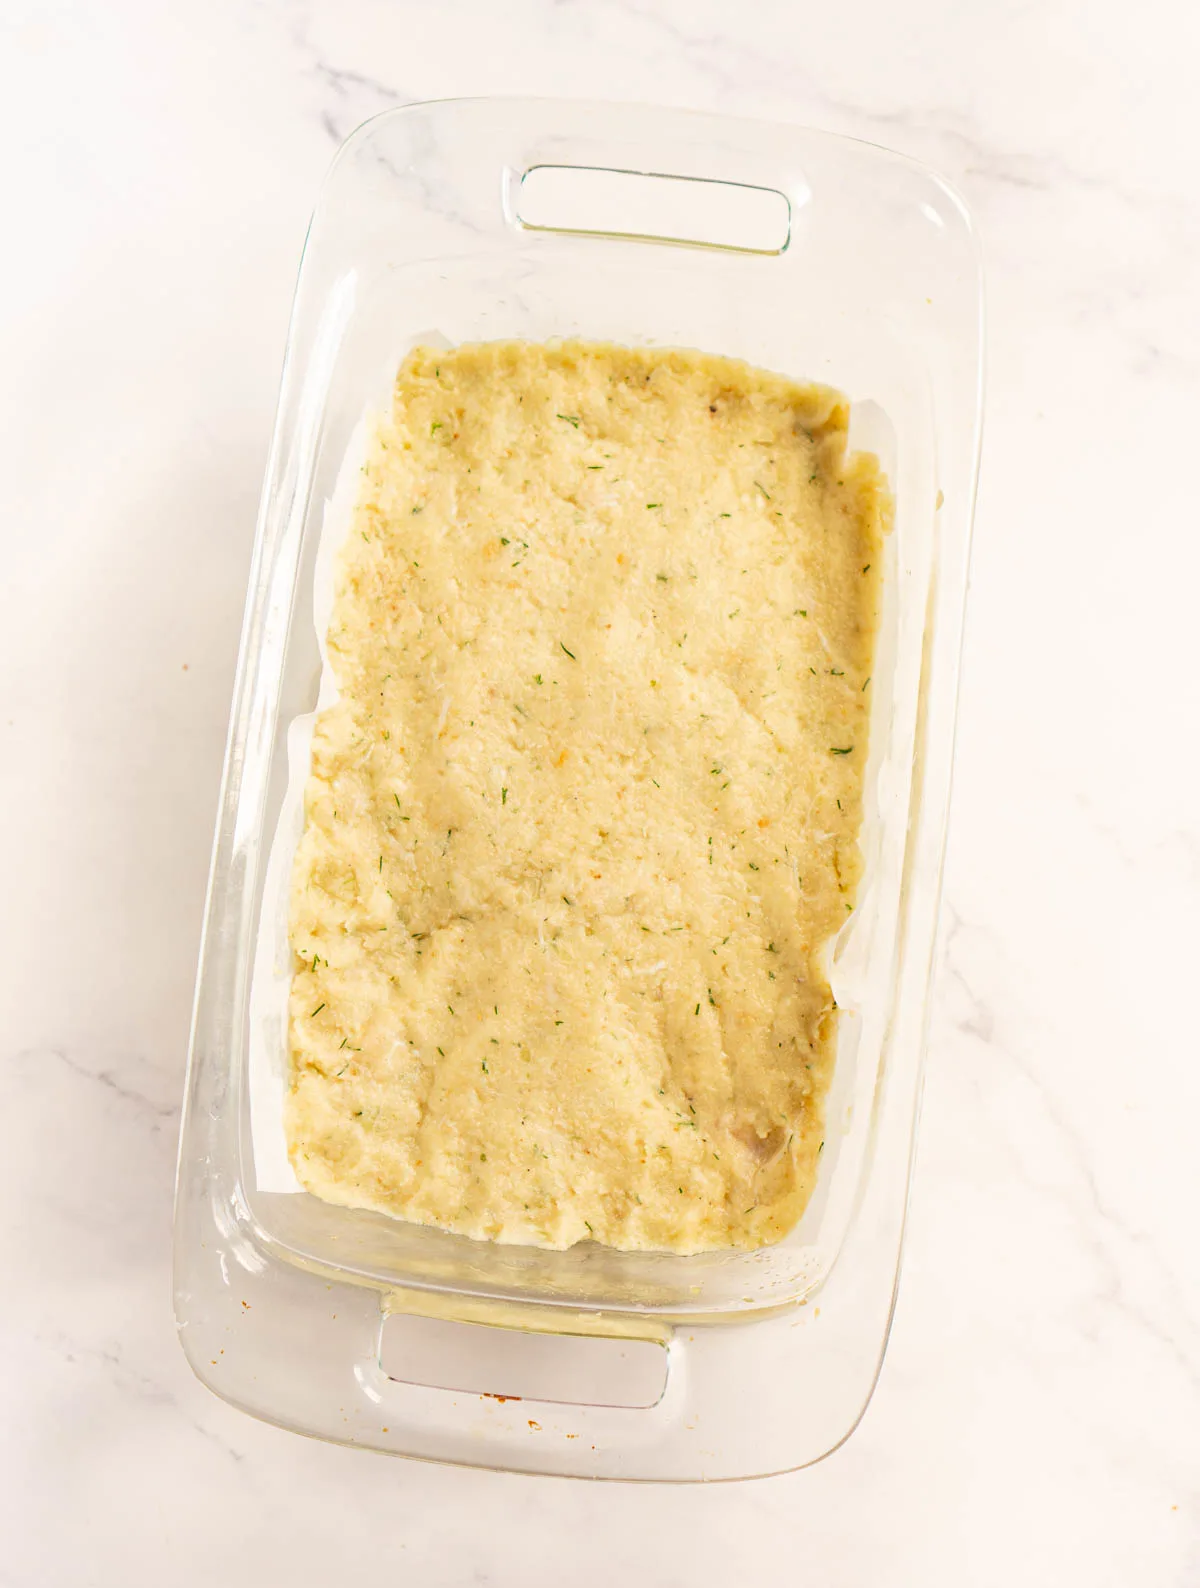 Fish loaf mixture pressed into a loaf pan